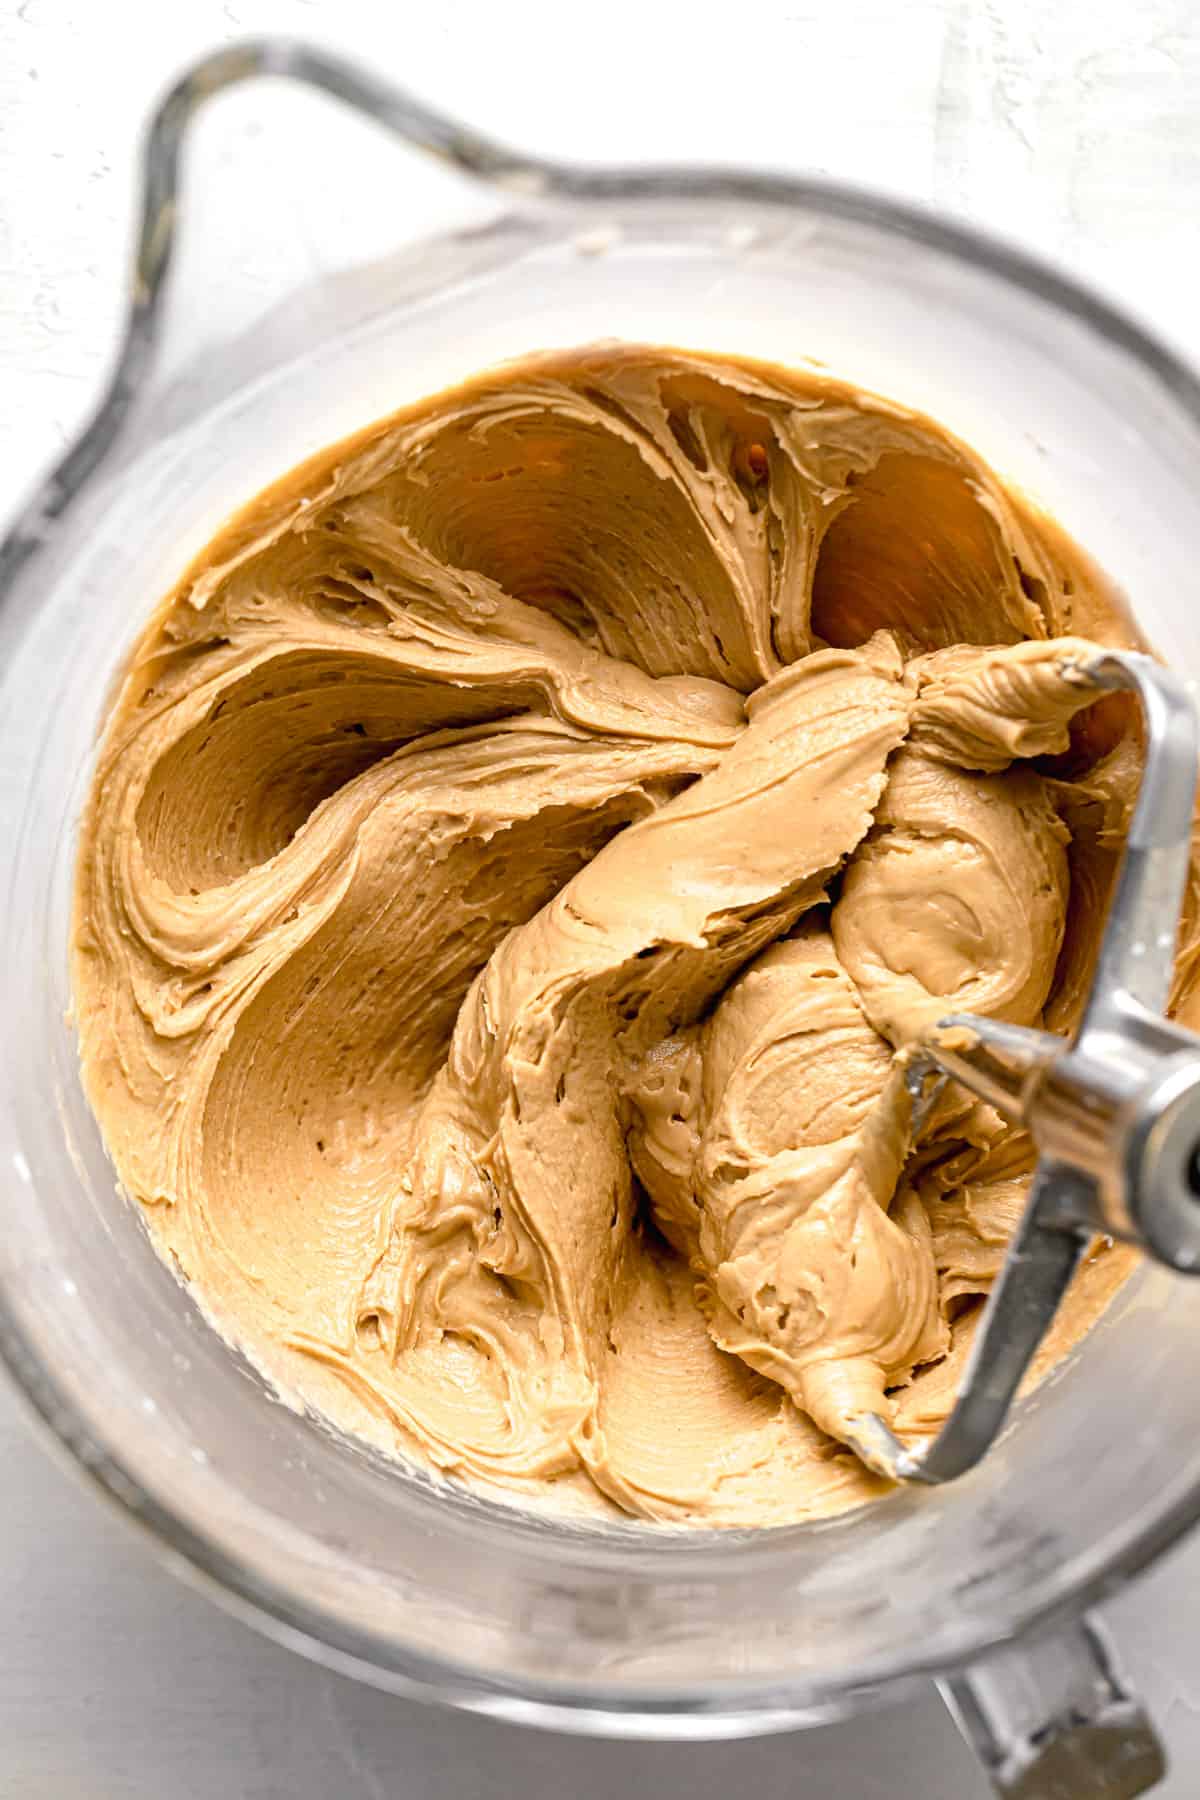 peanut butter frosting in glass bowl